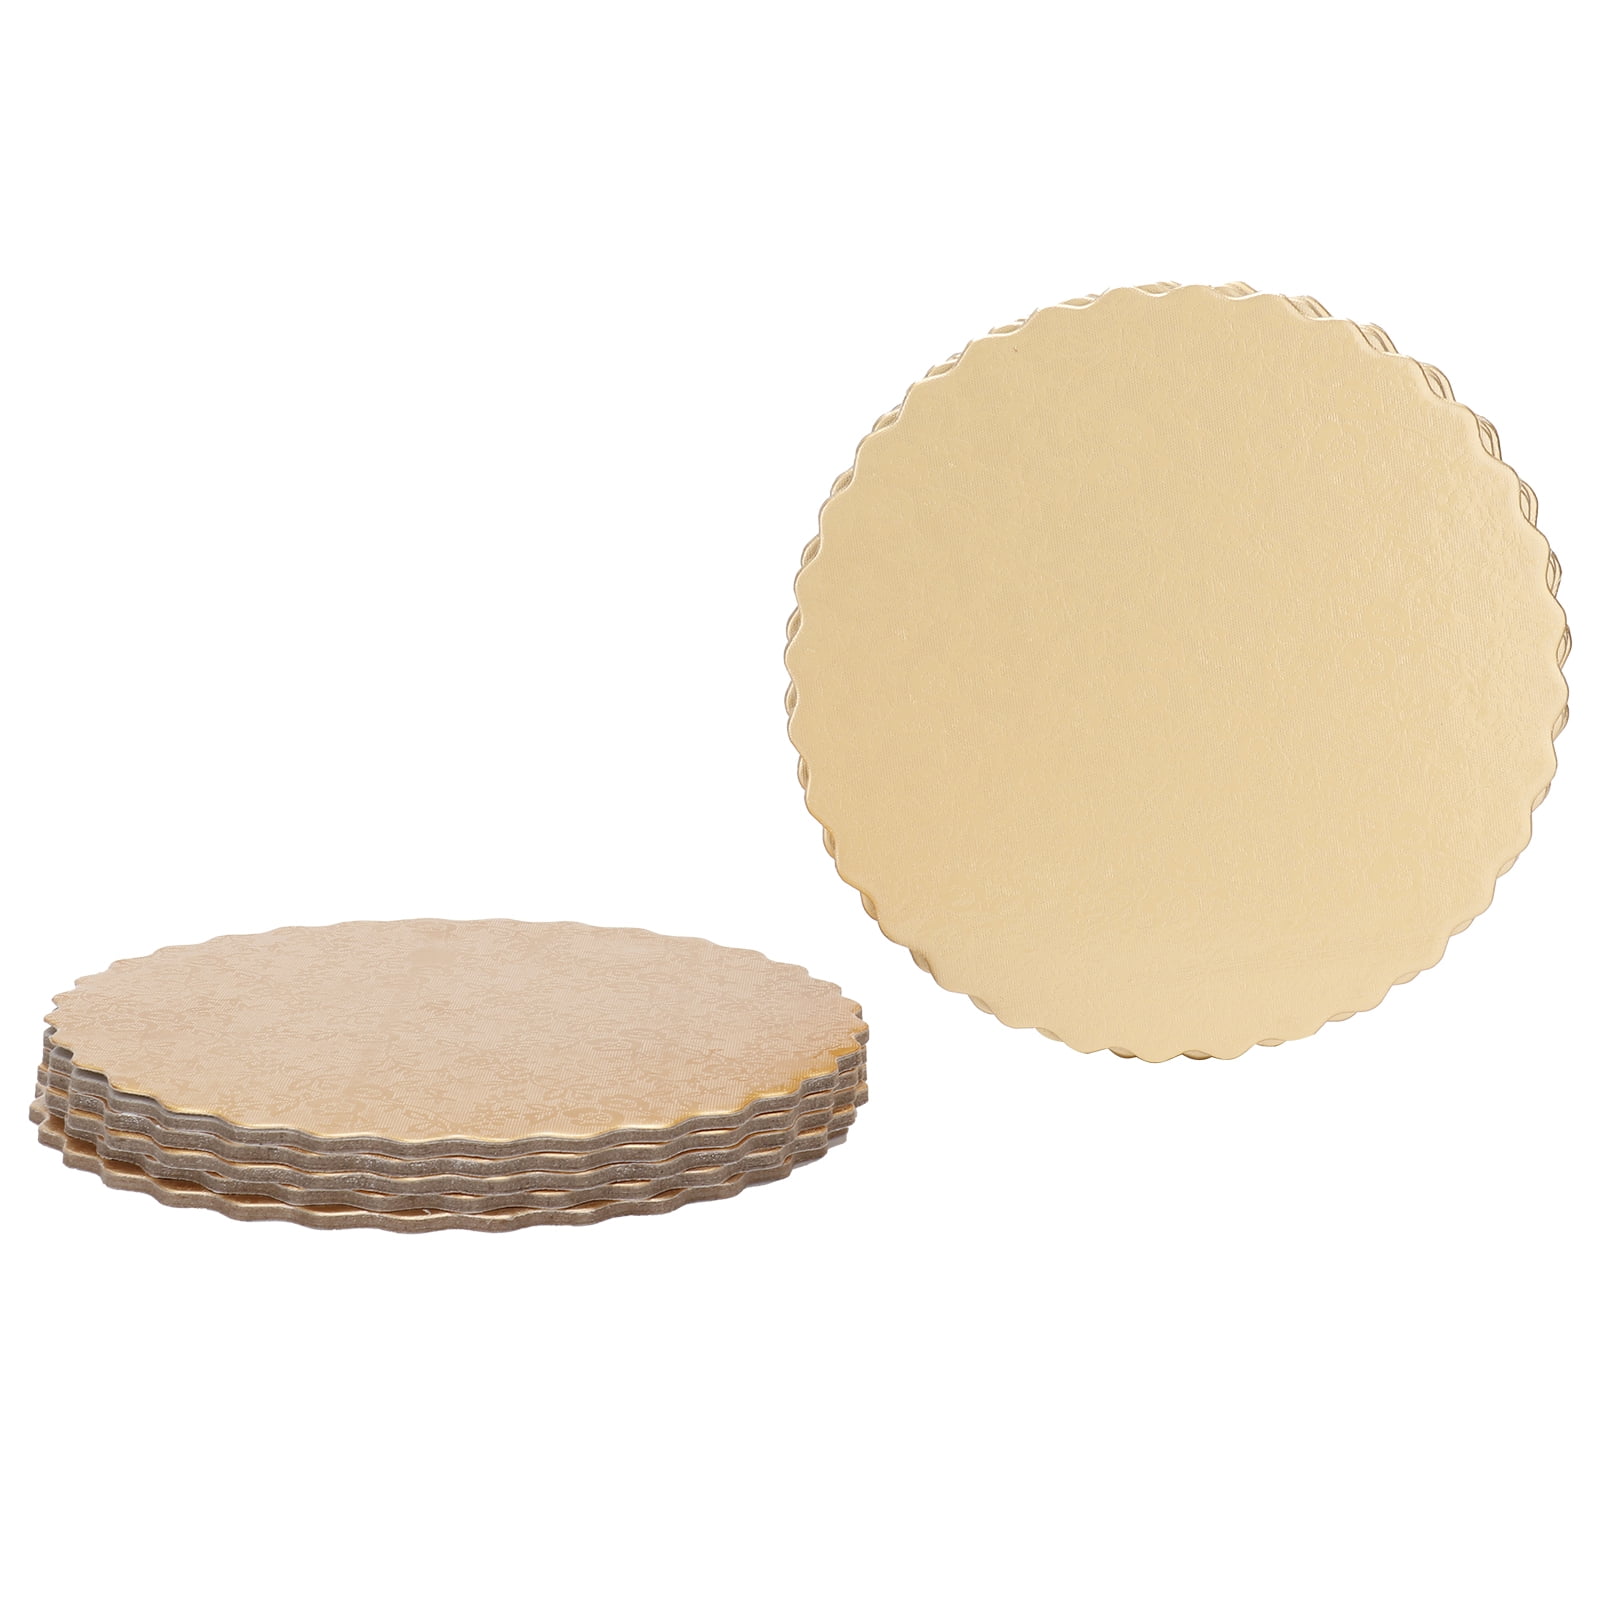 Details about   10PCS Double-Sided Pattern Round Cake Boards Reusable Cake Trays For Wedding 